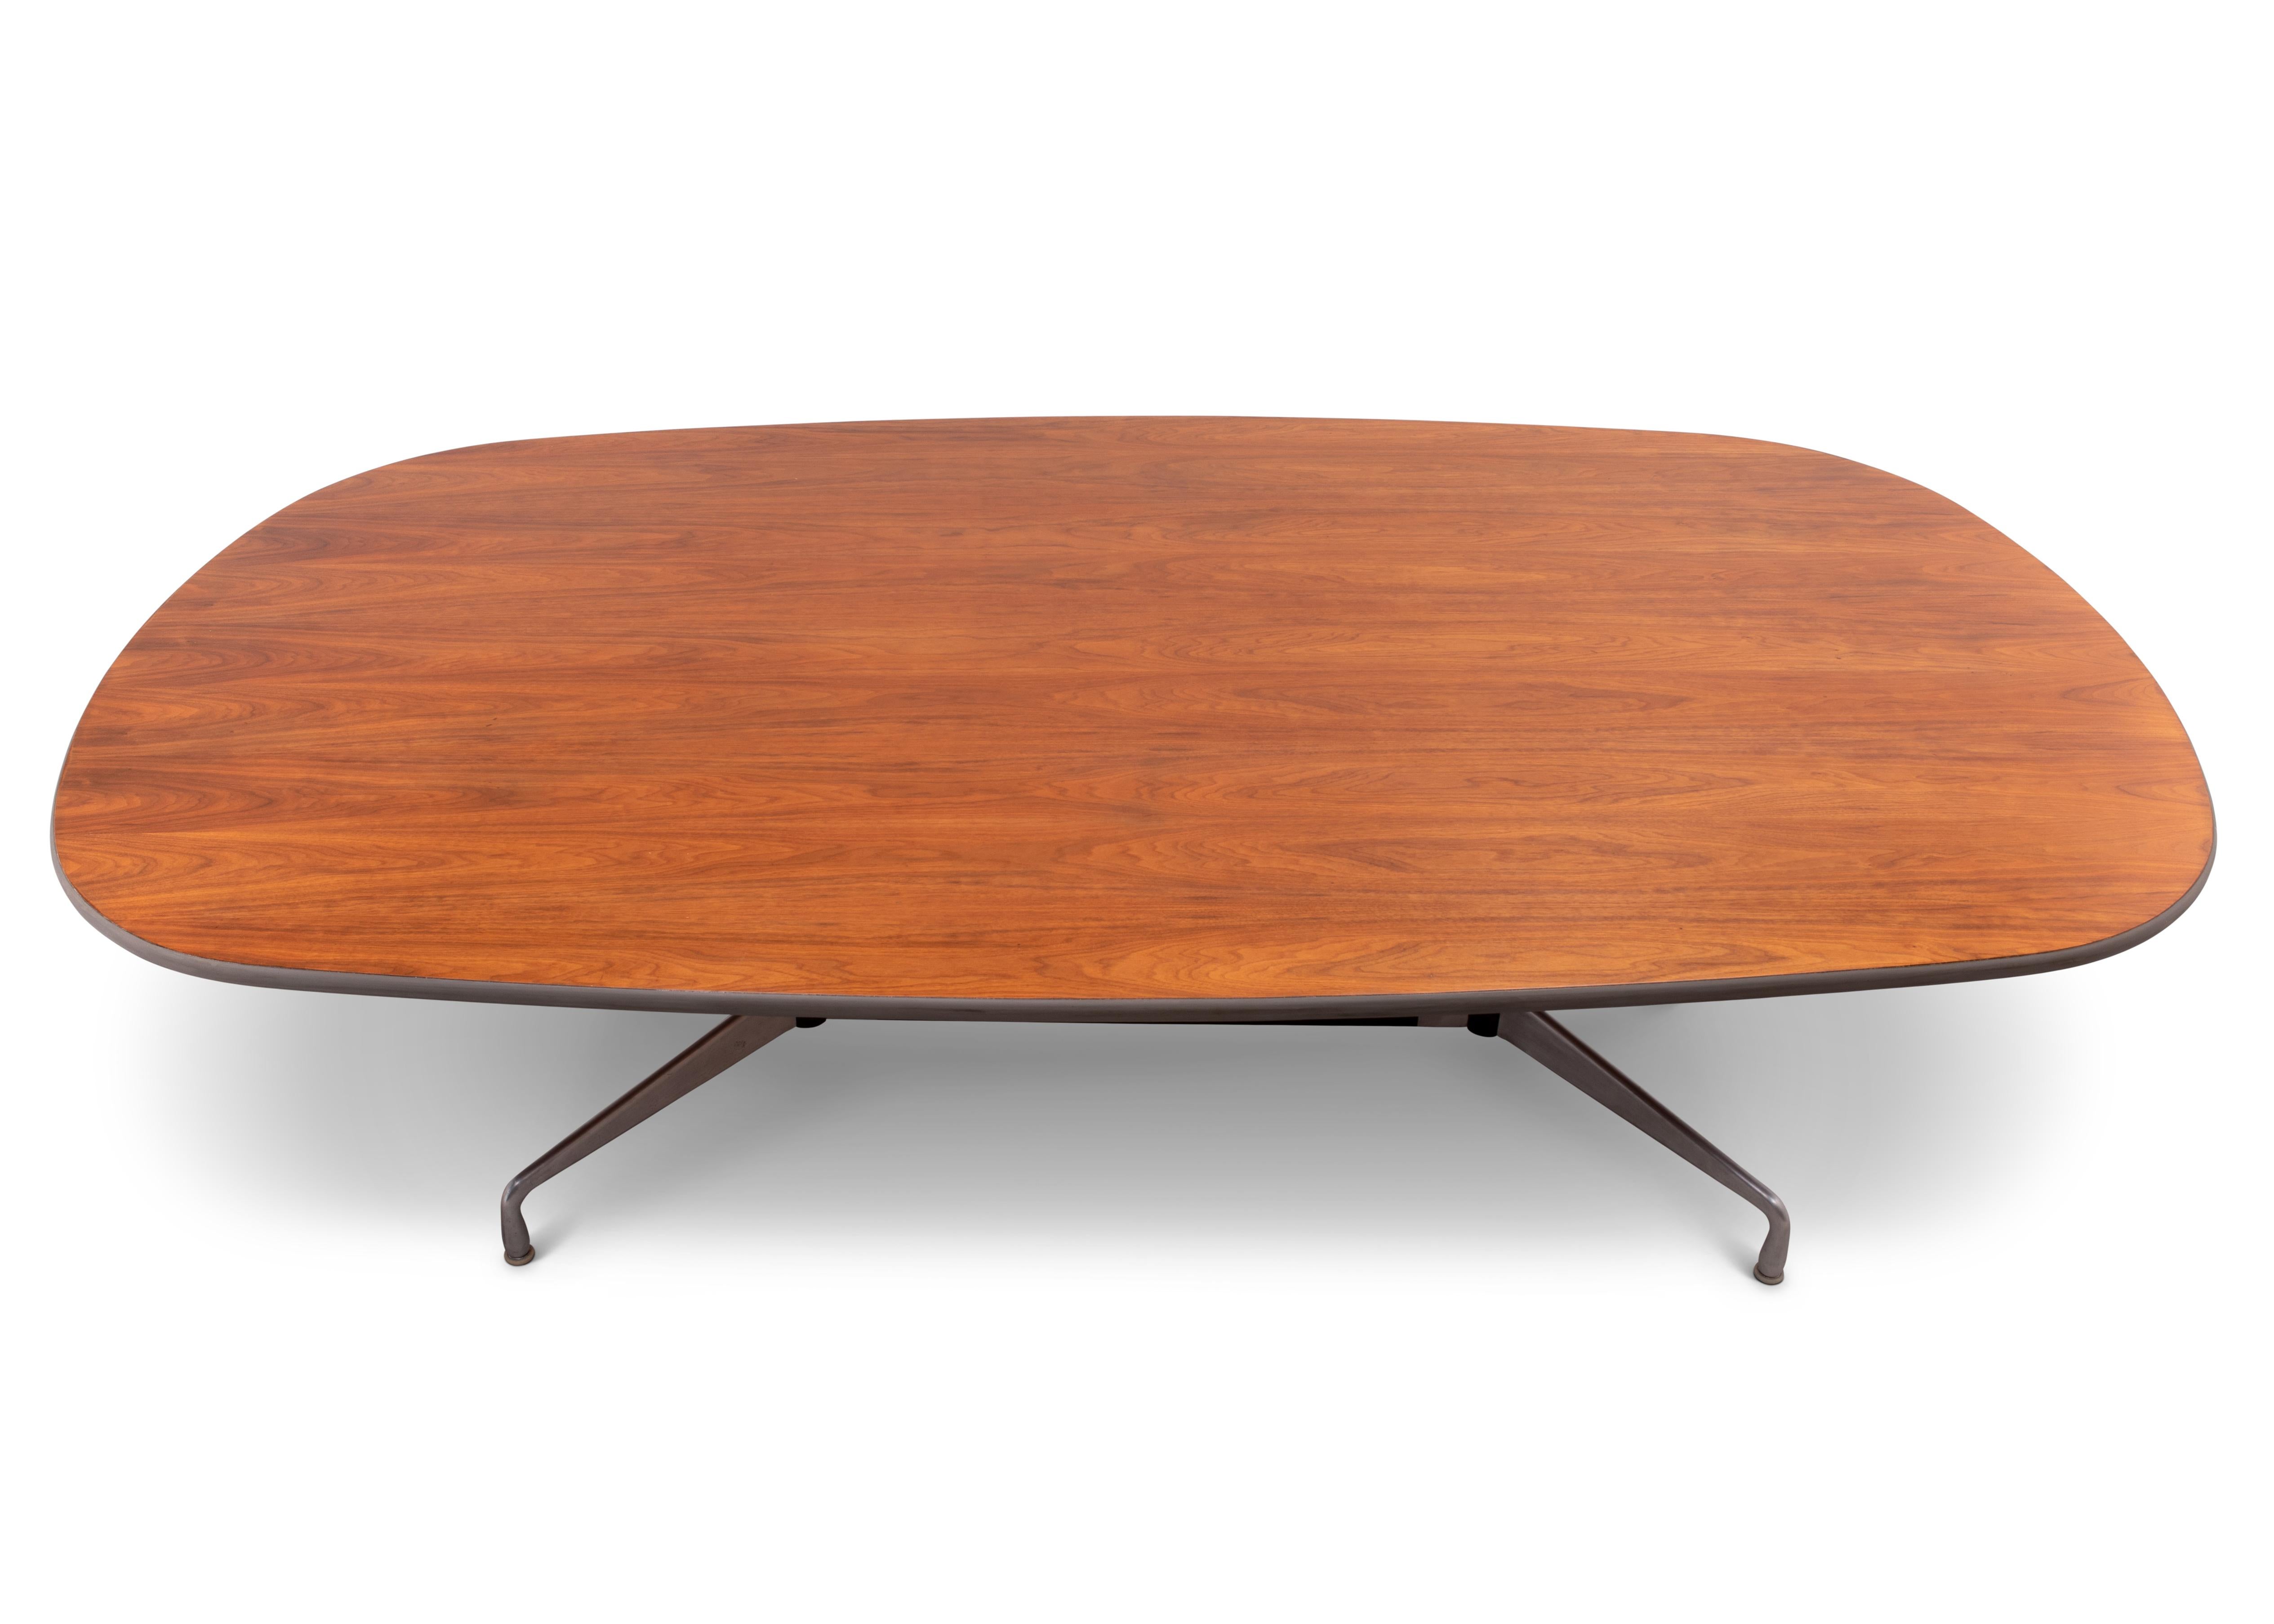 Charles & Ray Eames Herman Miller Walnut Segmented Base Racetrack Dining Table In Good Condition For Sale In Forest Grove, PA